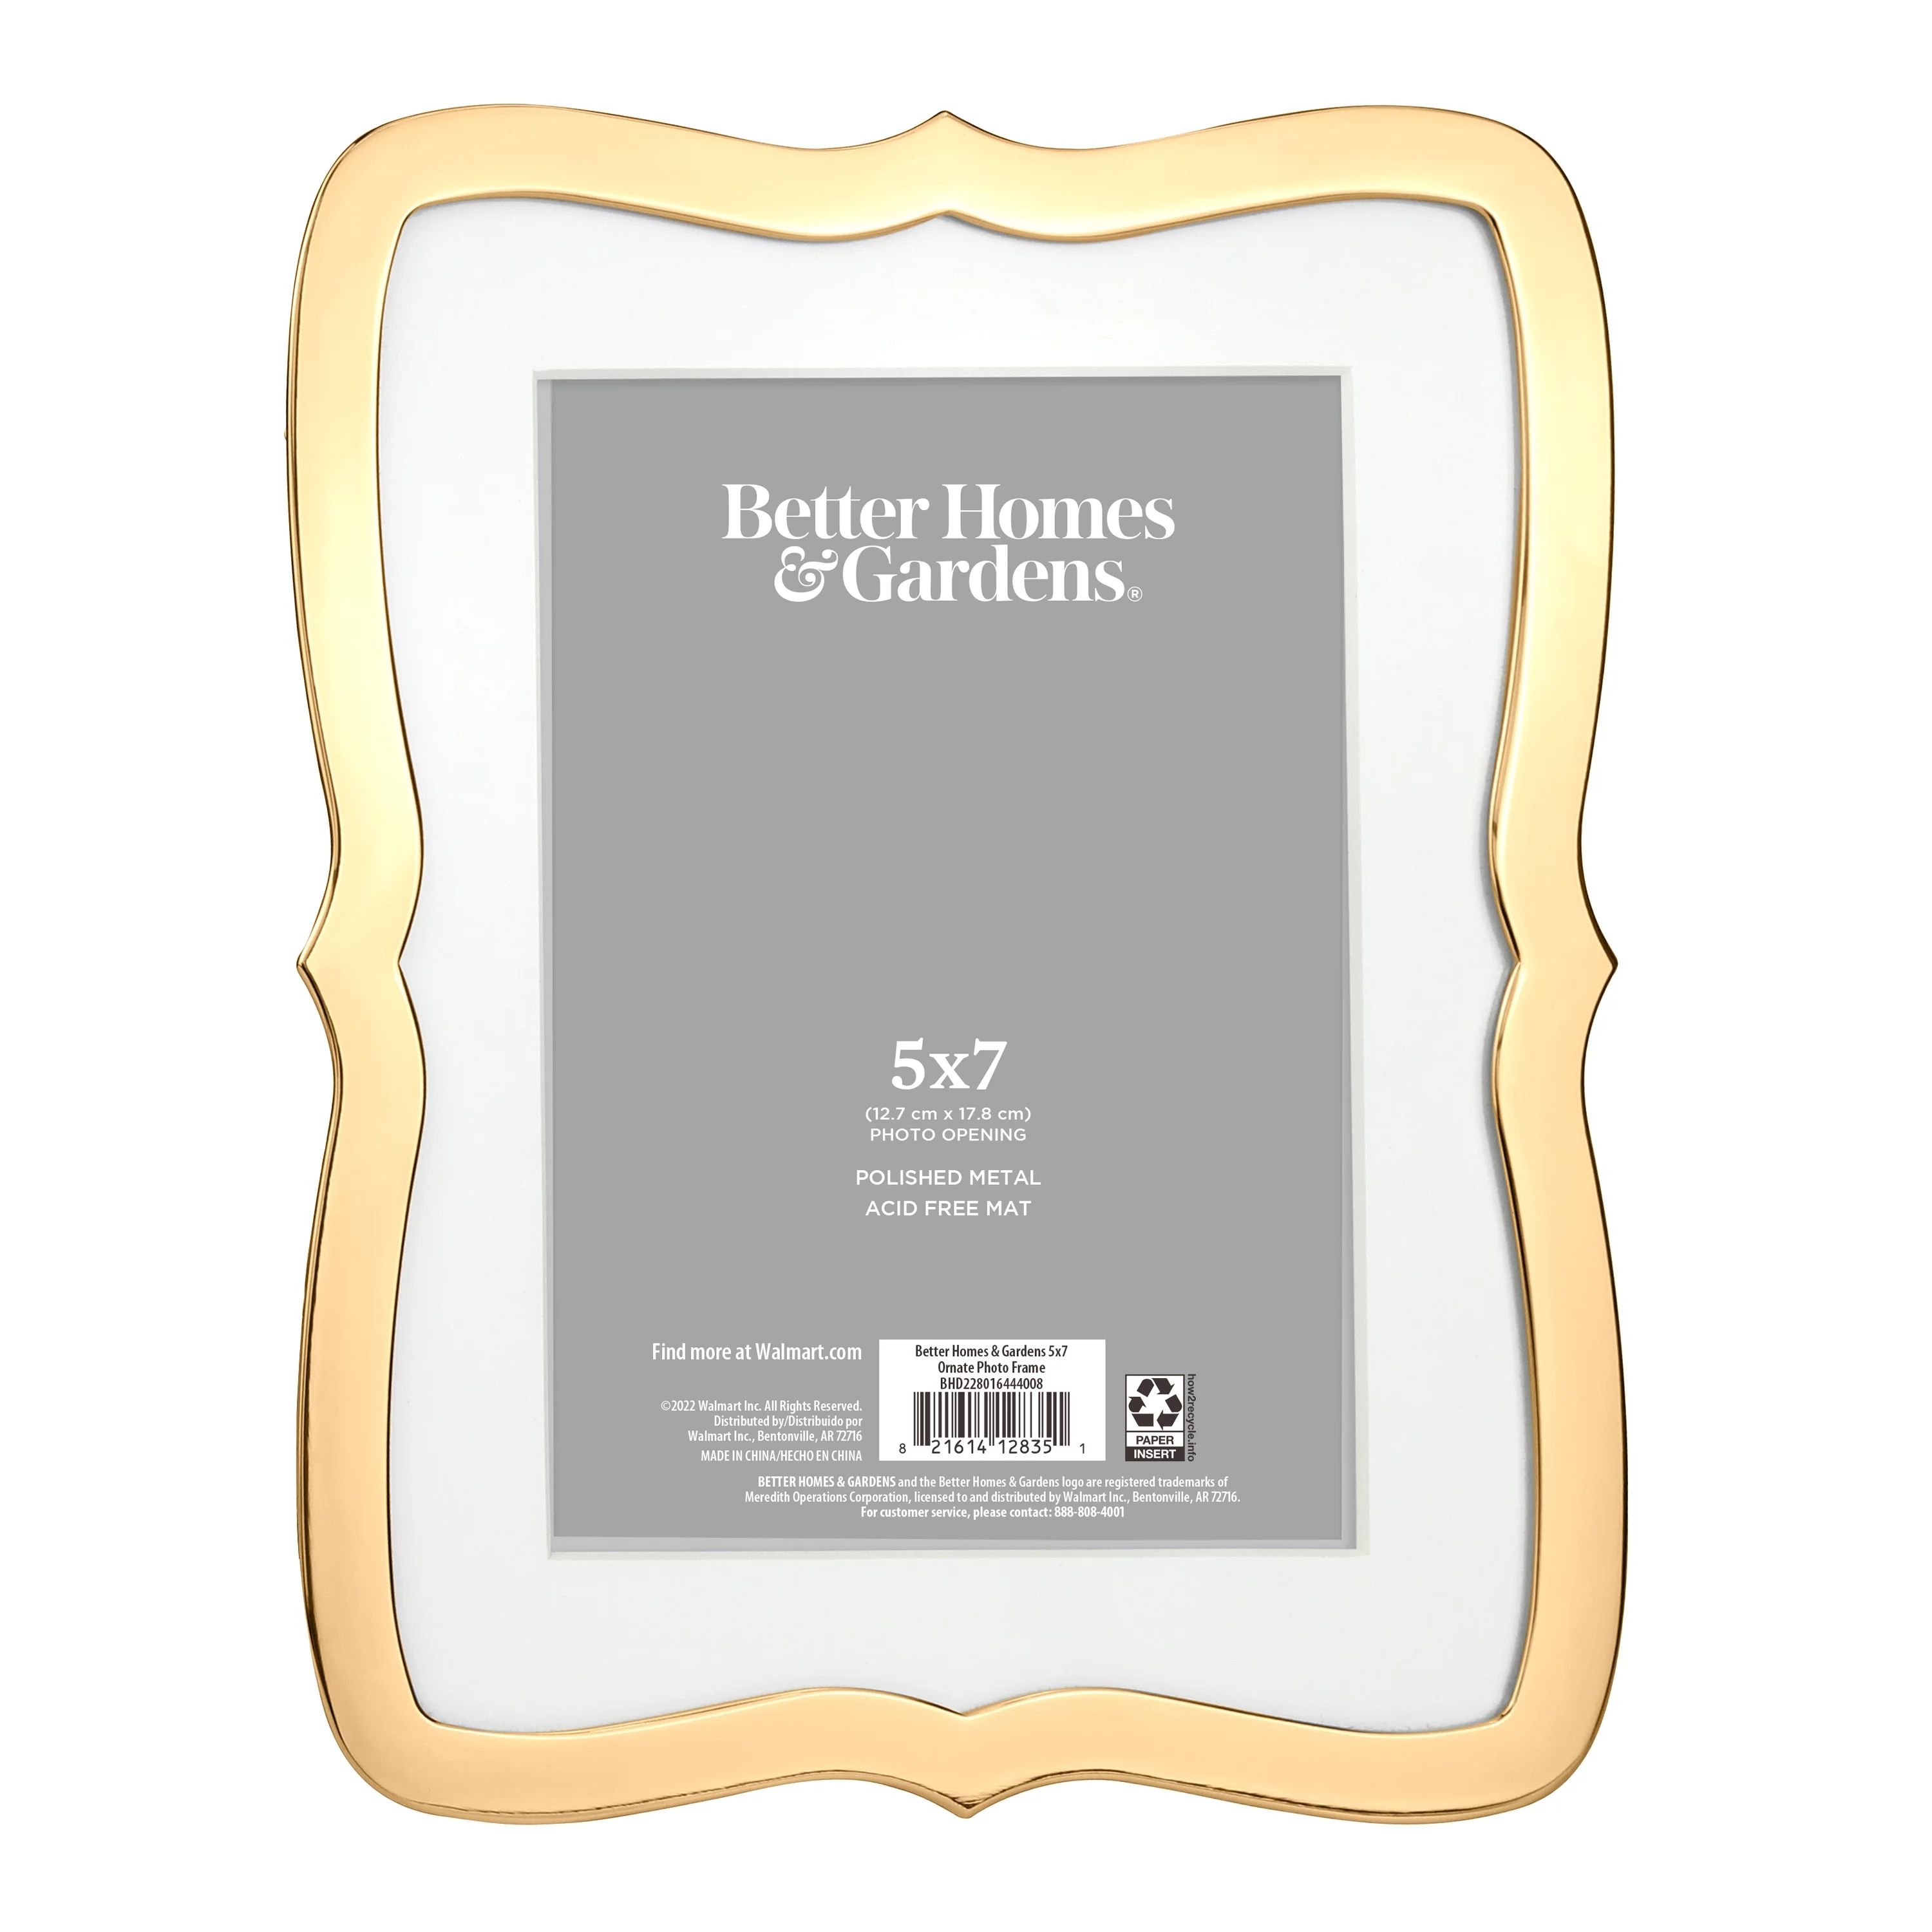 Better Homes & Gardens 5x7 Ornate Tabletop Picture Frame, Gold | Walmart (US)